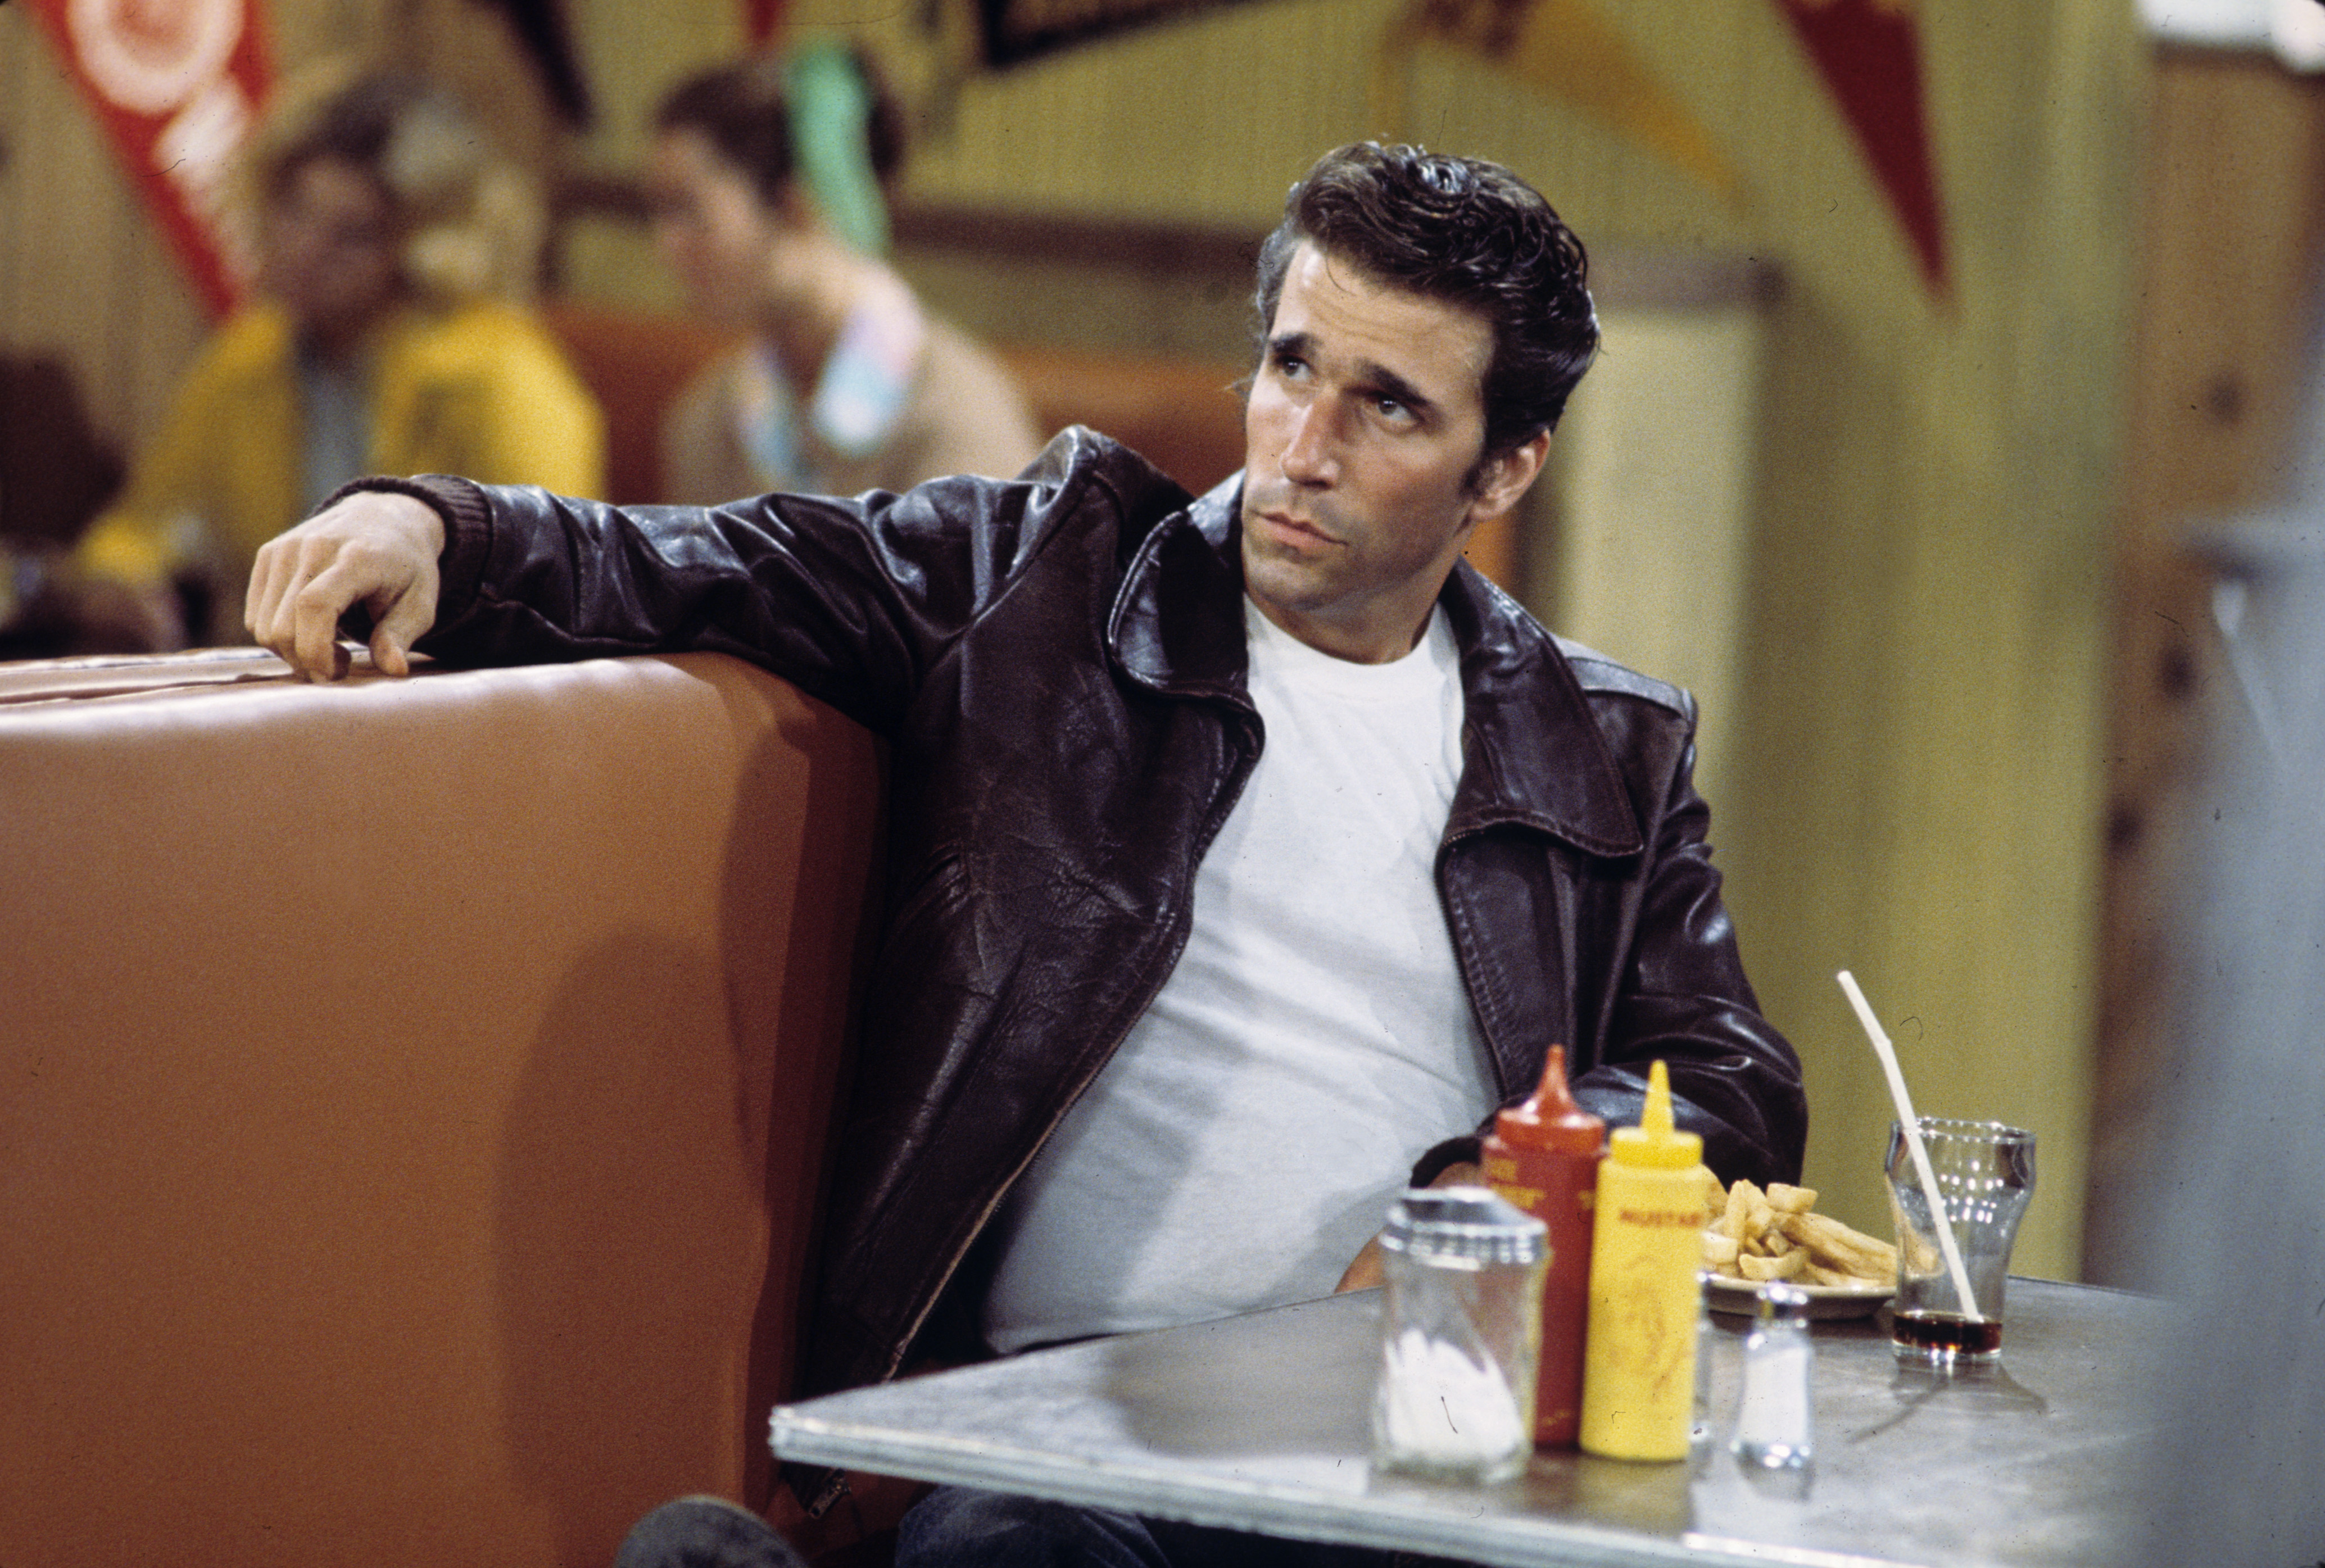 Henry Winkler as The Fonz on "Happy Days" | Source: Getty Images